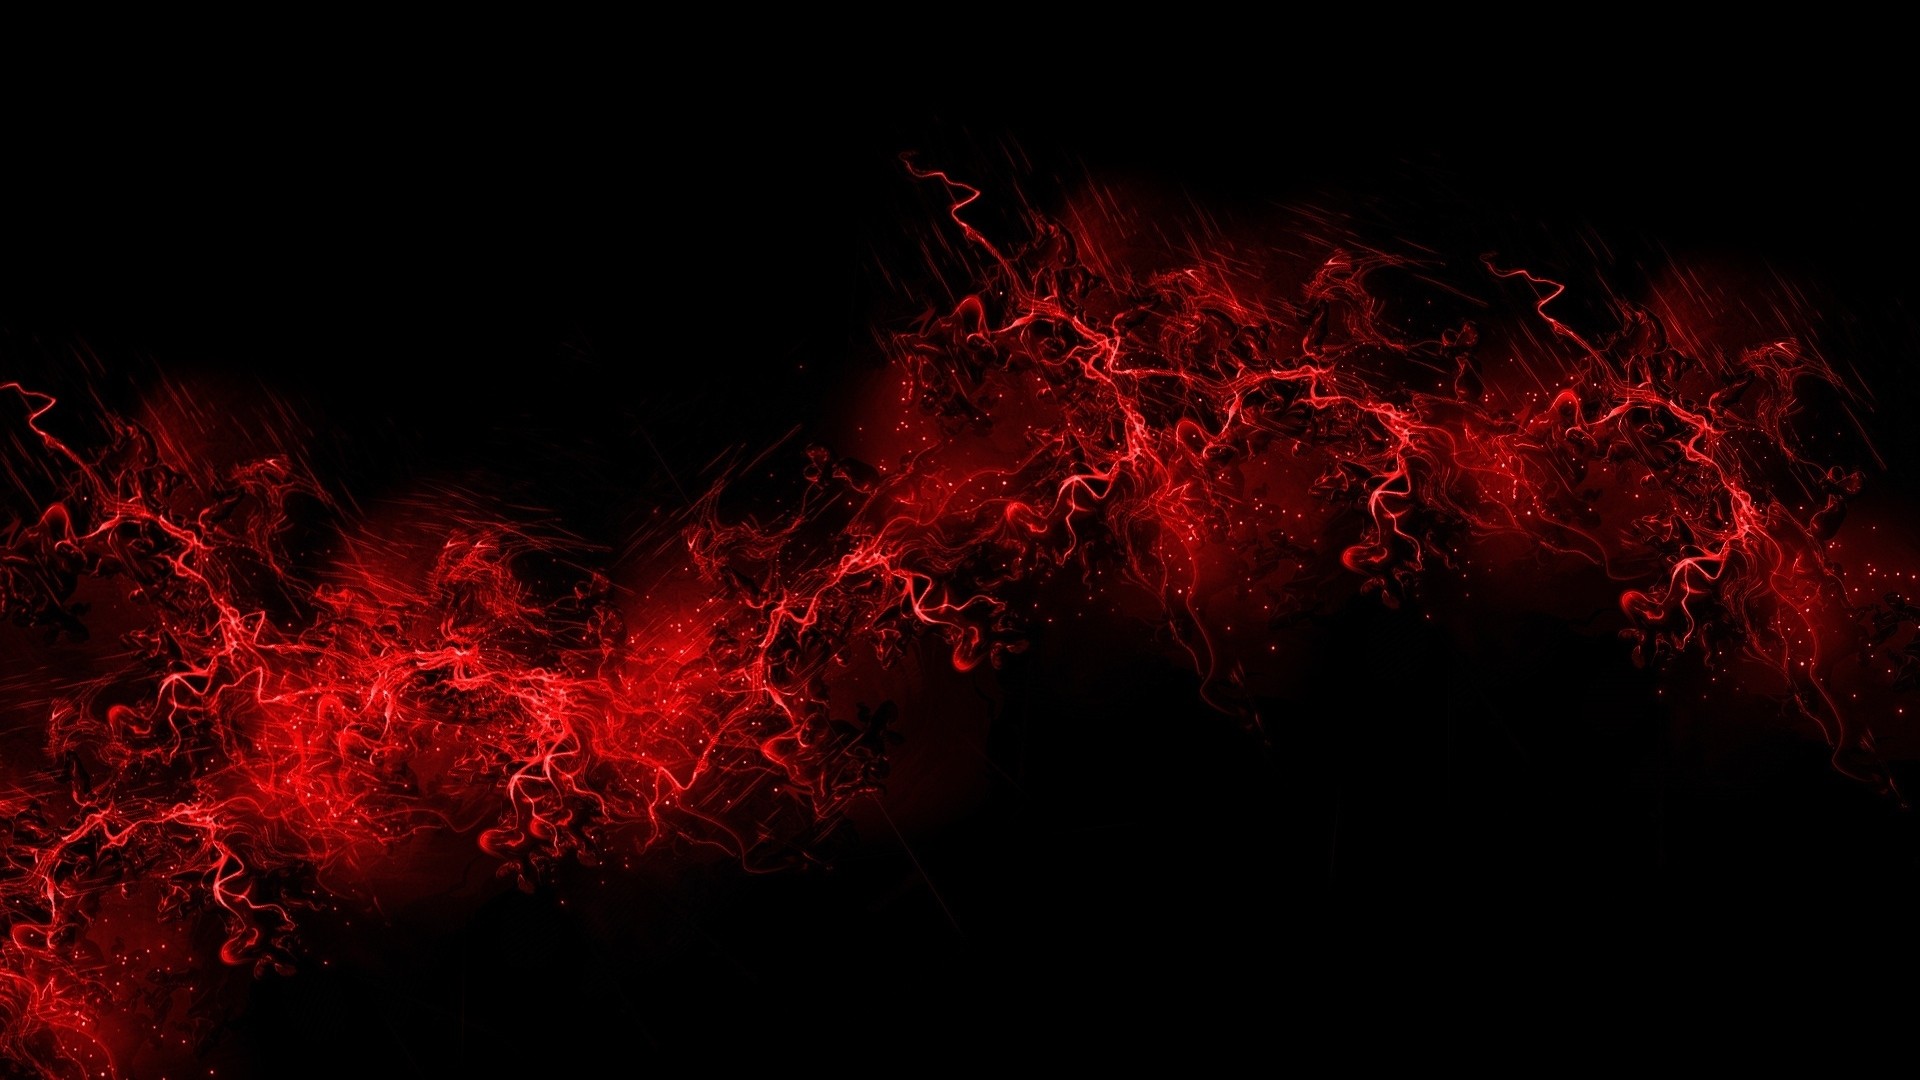 1920x1080 HD background images red and black - Full Hd 1080p Abstract Wallpapers  Desktop Backgrounds Hd inside